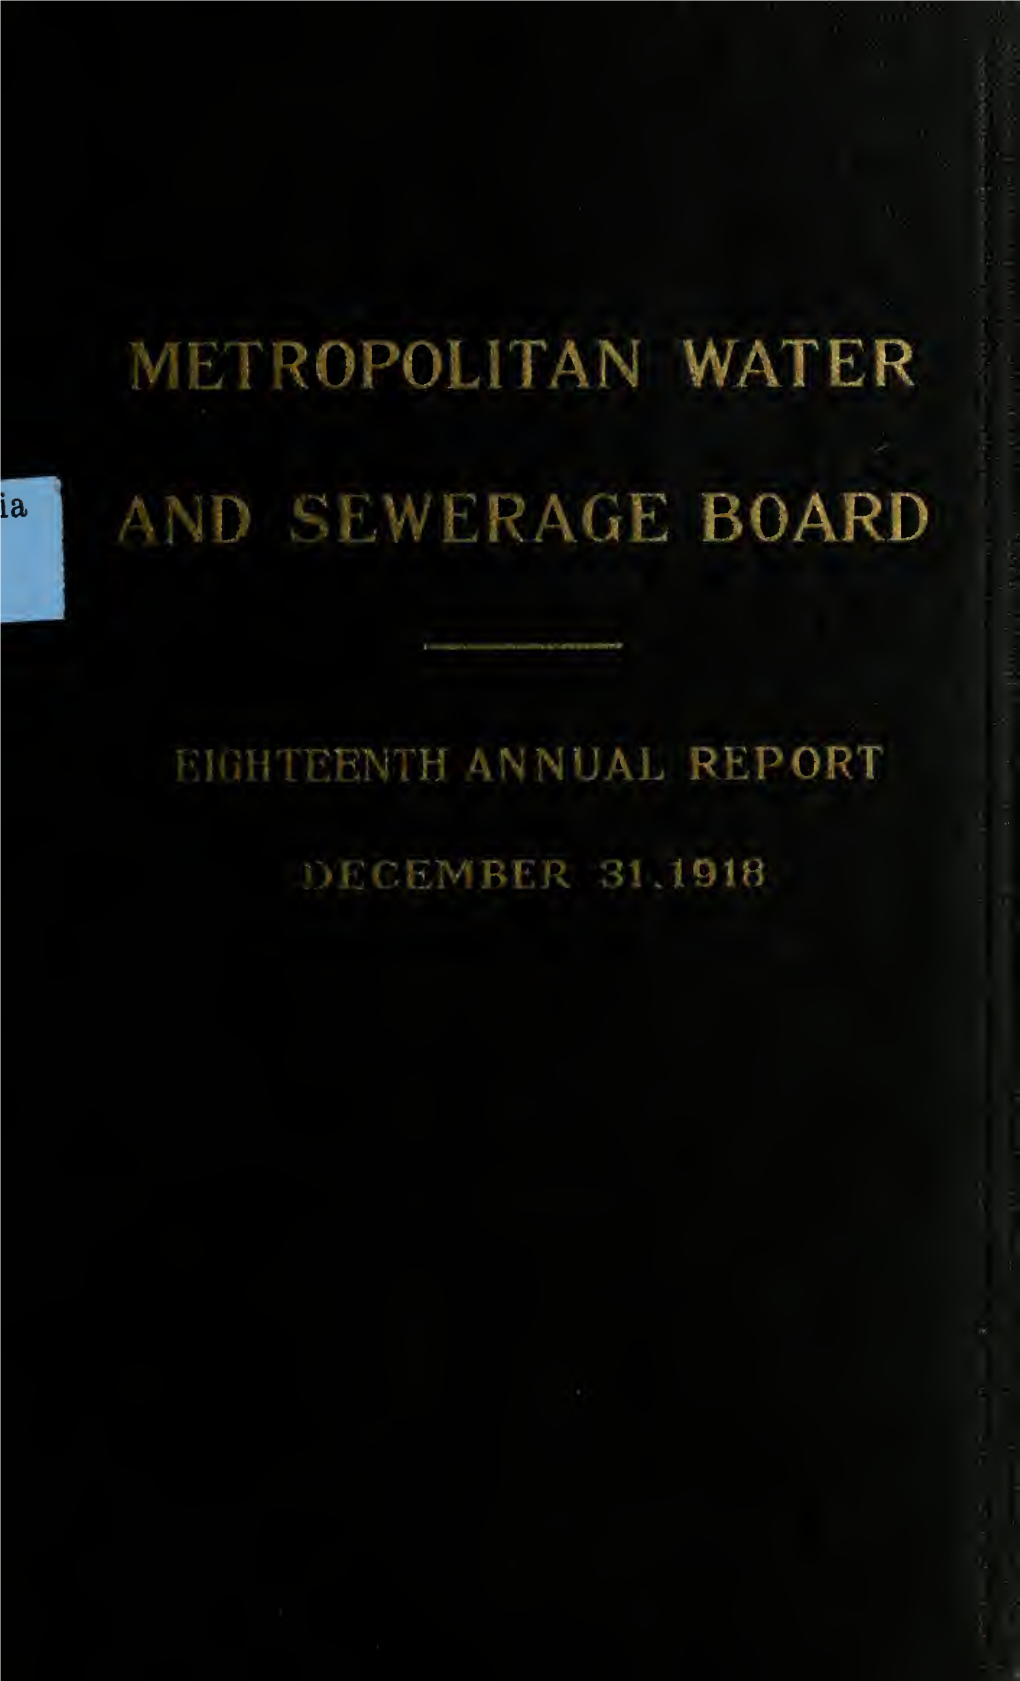 First-Nineteenth Annual Report of the Metropolitan Water and Sewerage